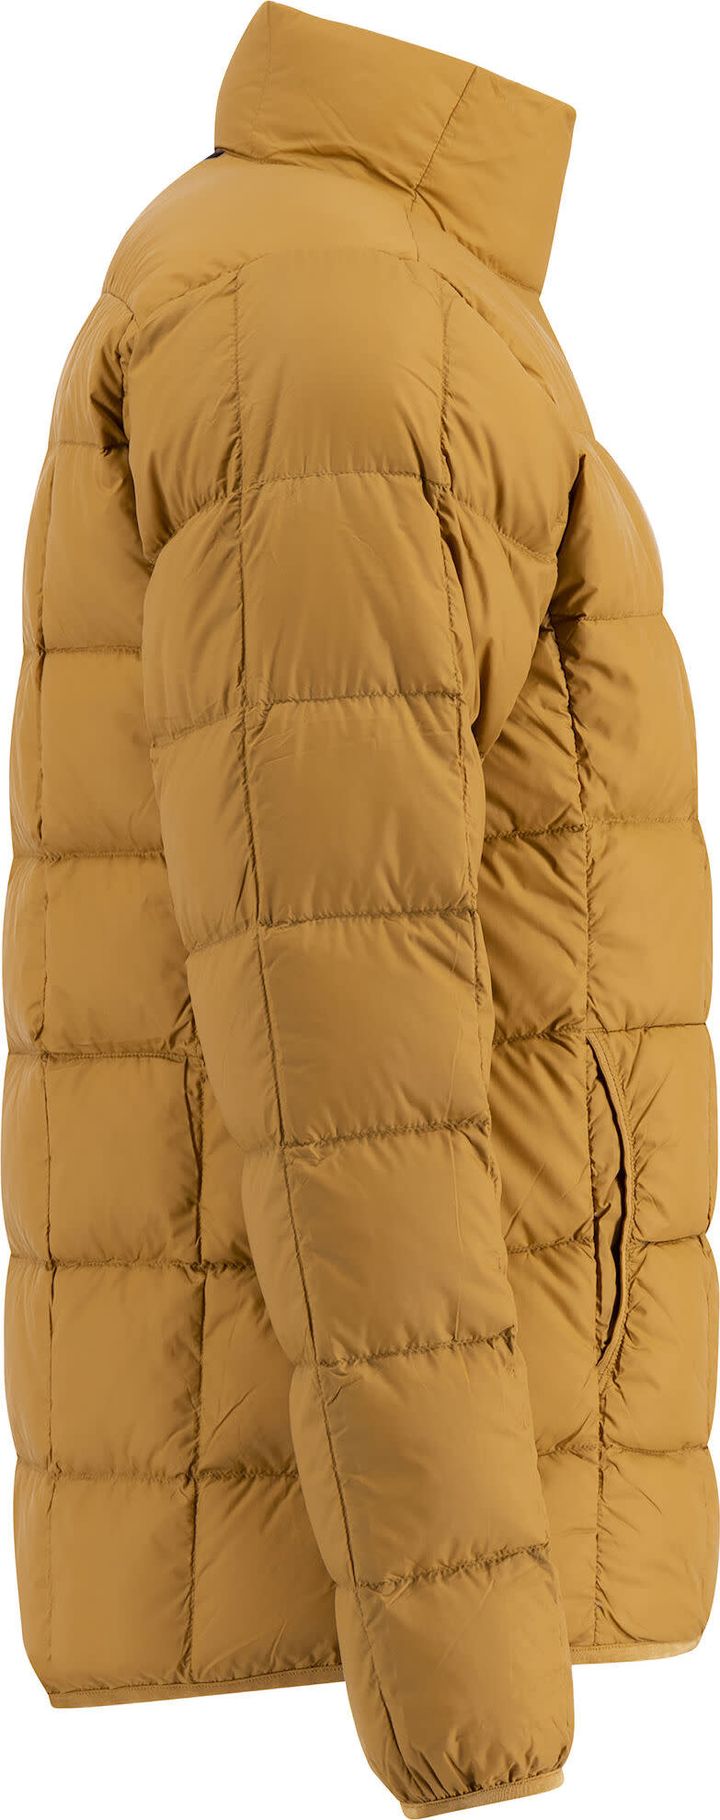 Lundhags Men's Tived Down Jacket Dark Gold Lundhags